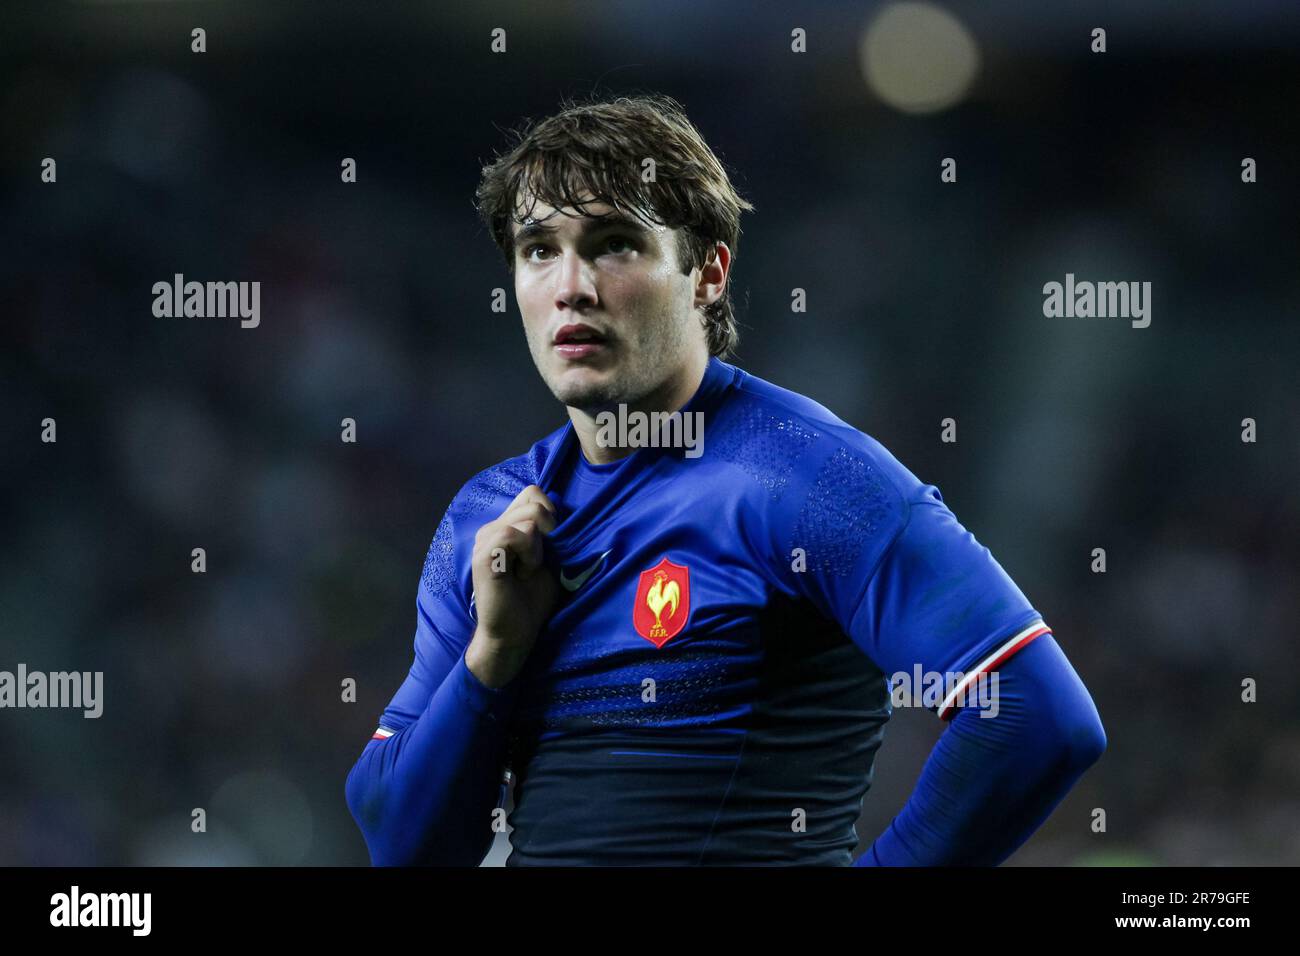 France’s Alexis Palisson in action against England during quarter-final 2 match of the Rugby World Cup 2011, Eden Park, Auckland, New Zealand, Saturday, October 08, 2011. Stock Photo